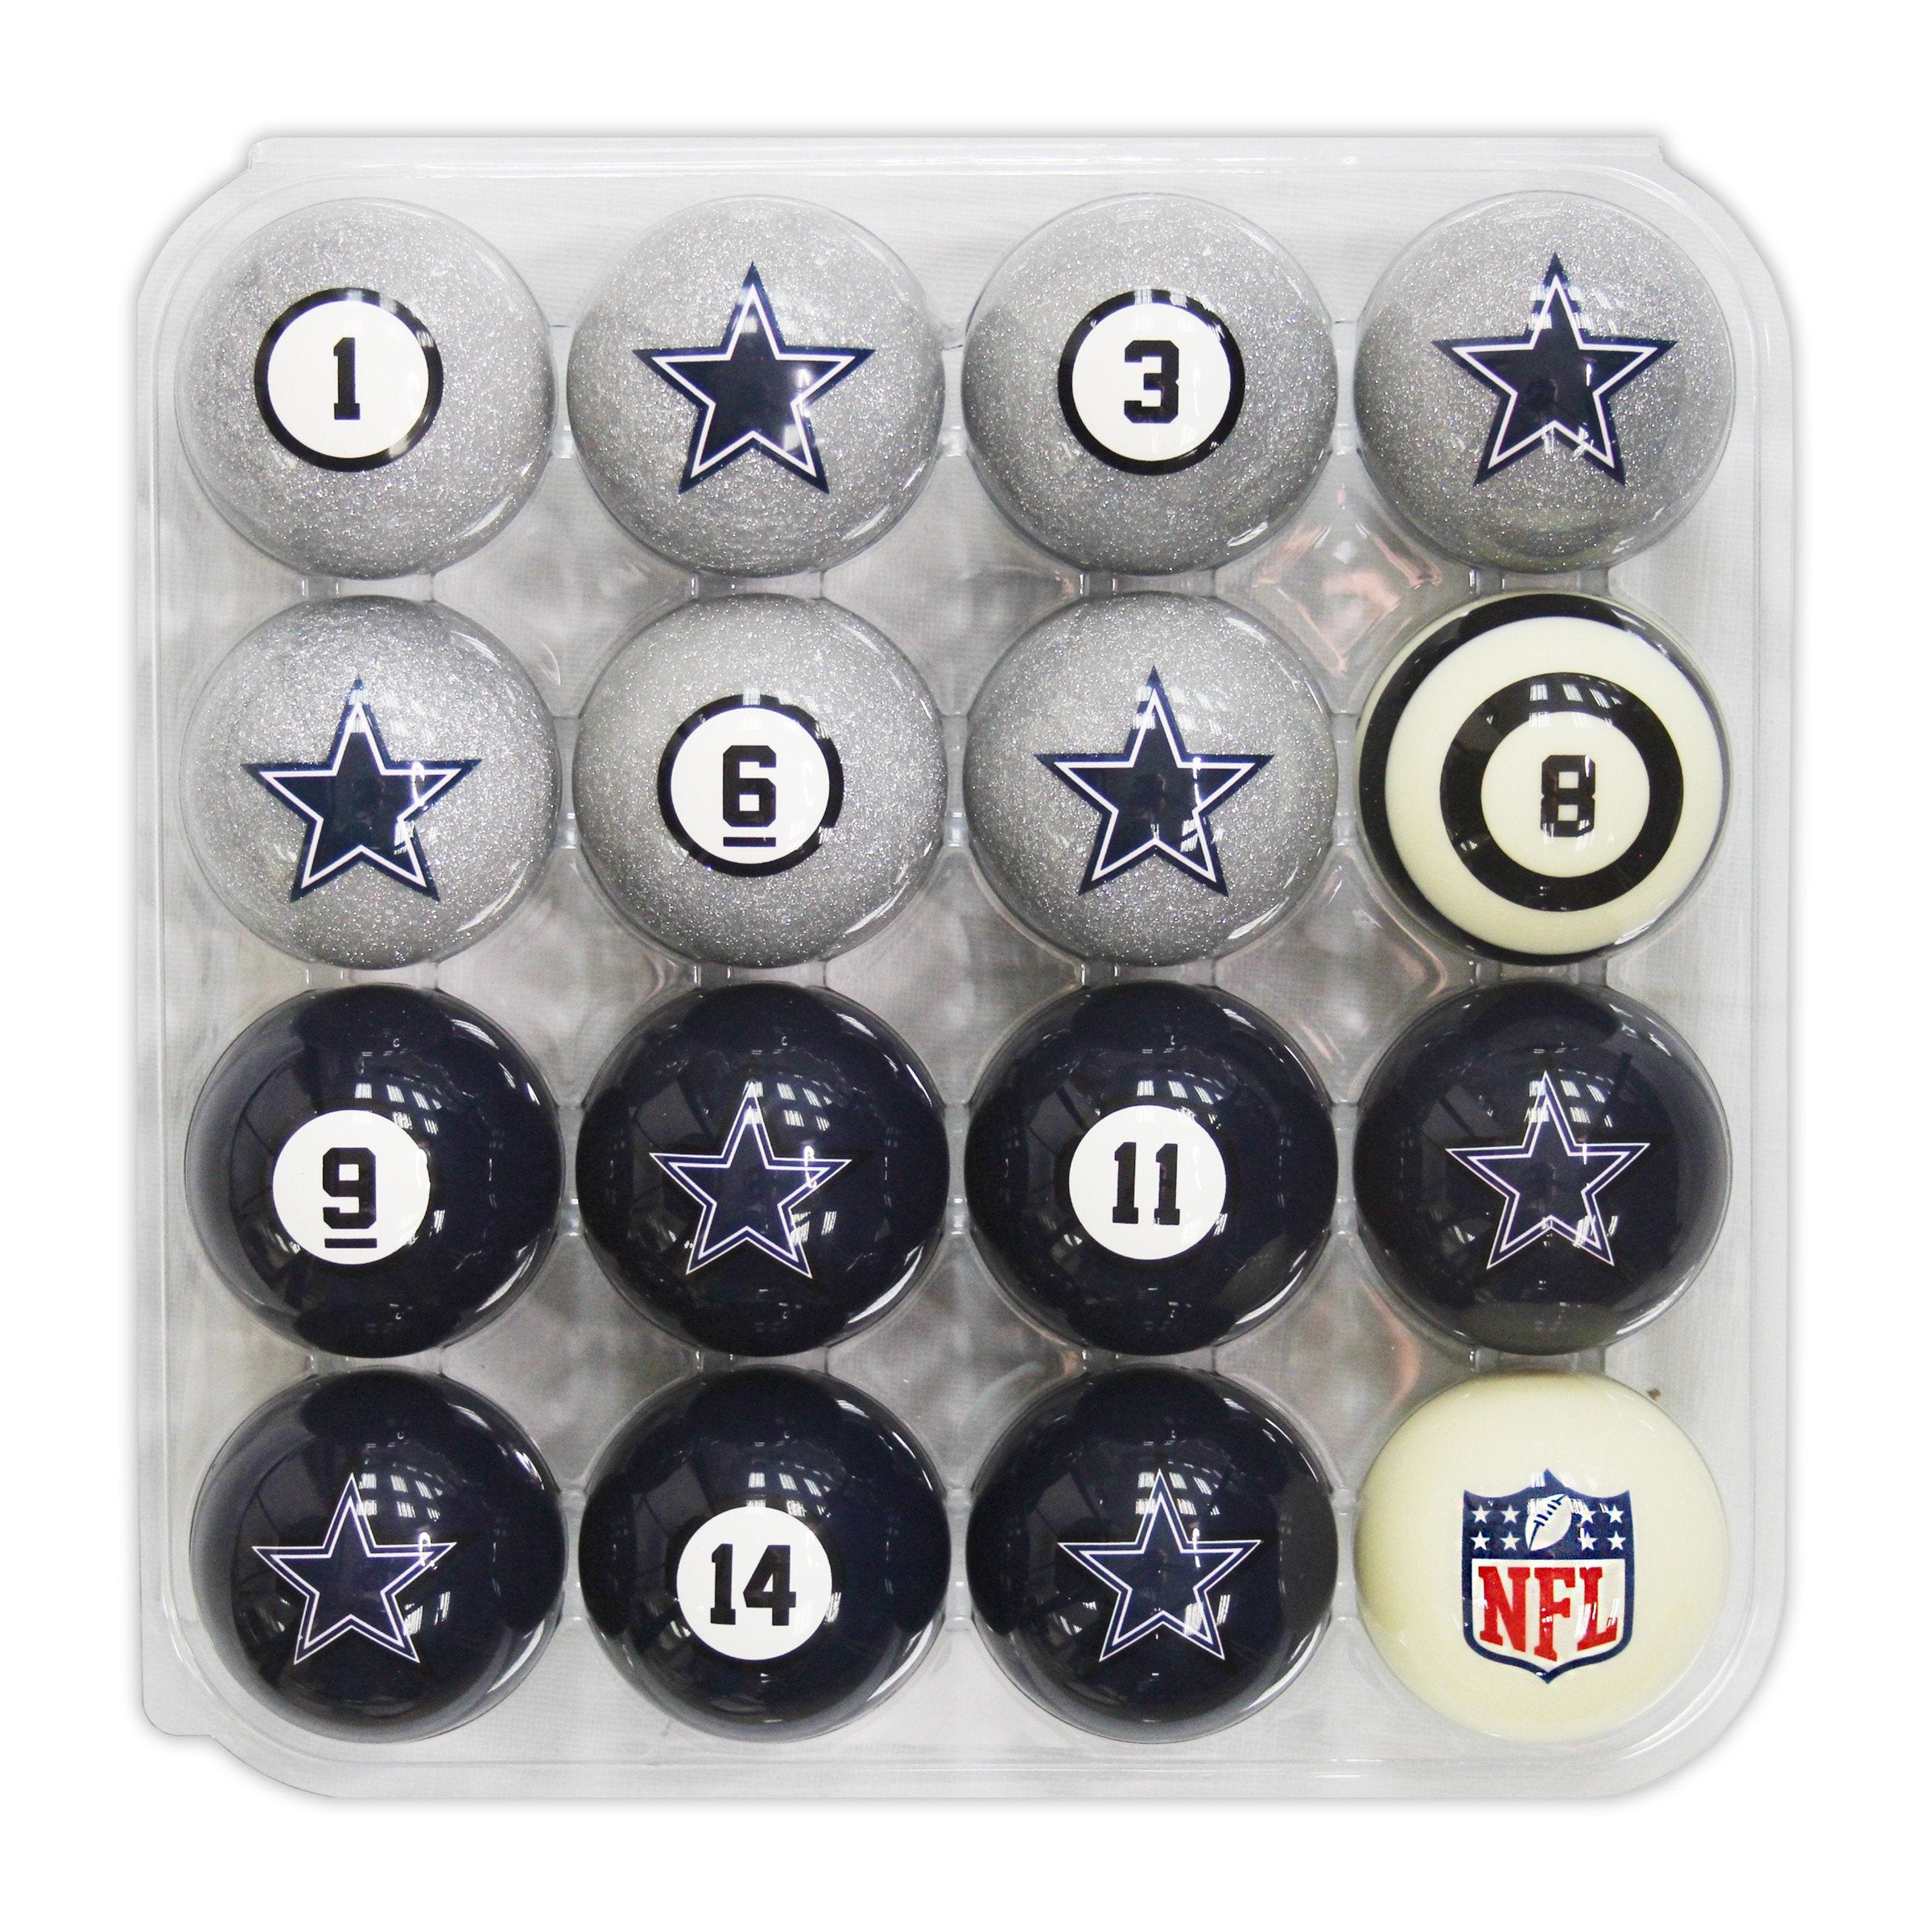 Imperial Dallas Cowboys Billiard Ball Set with Numbers